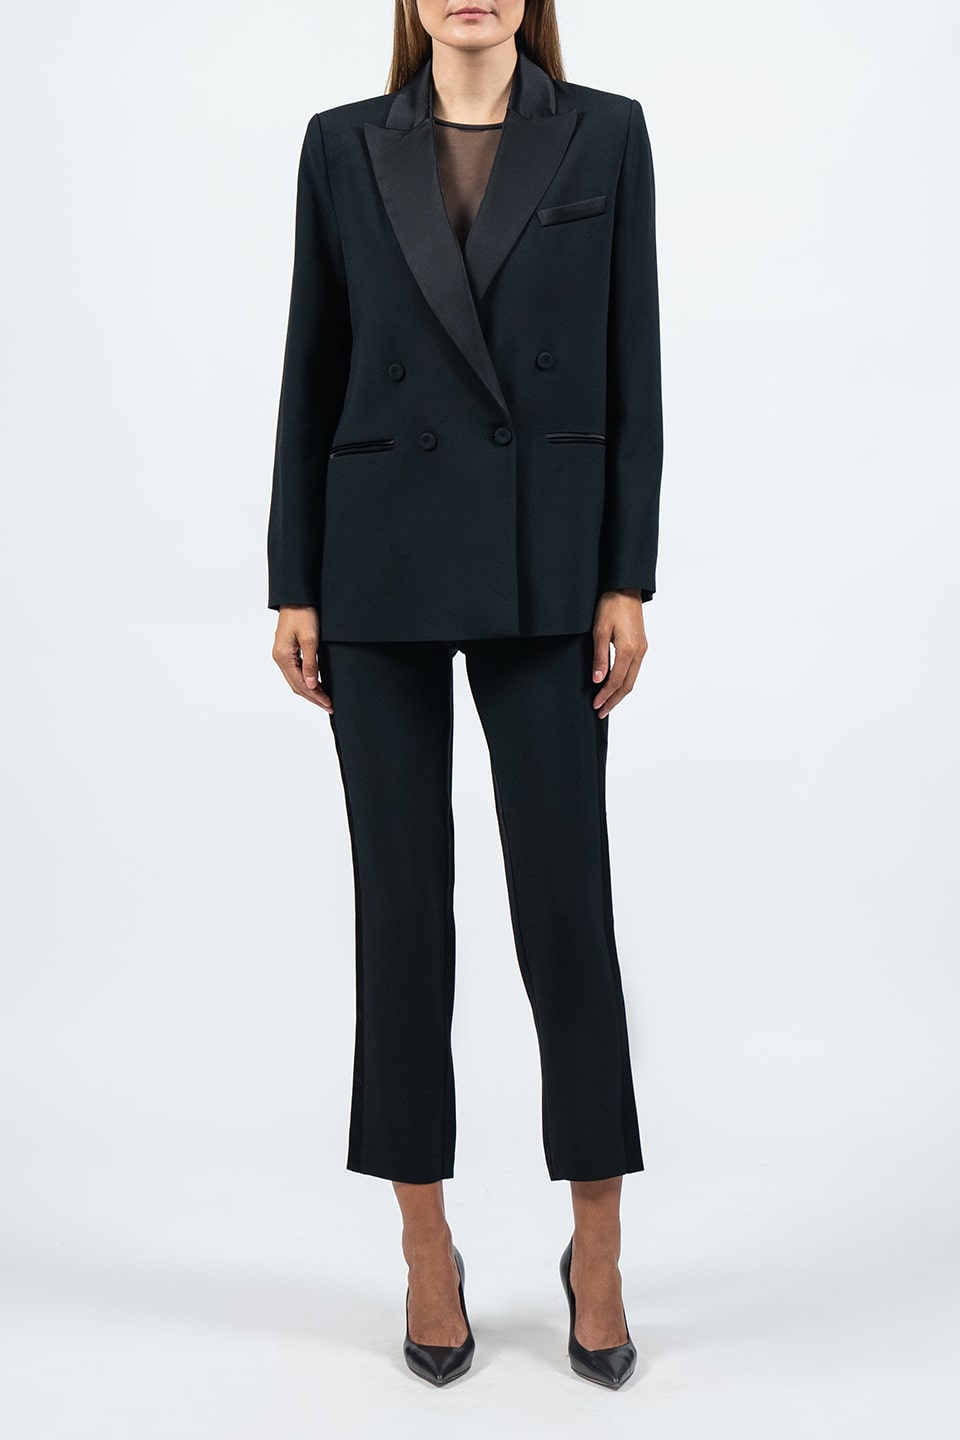 Designer Black Women pants, shop online with free delivery in UAE. Product gallery 6